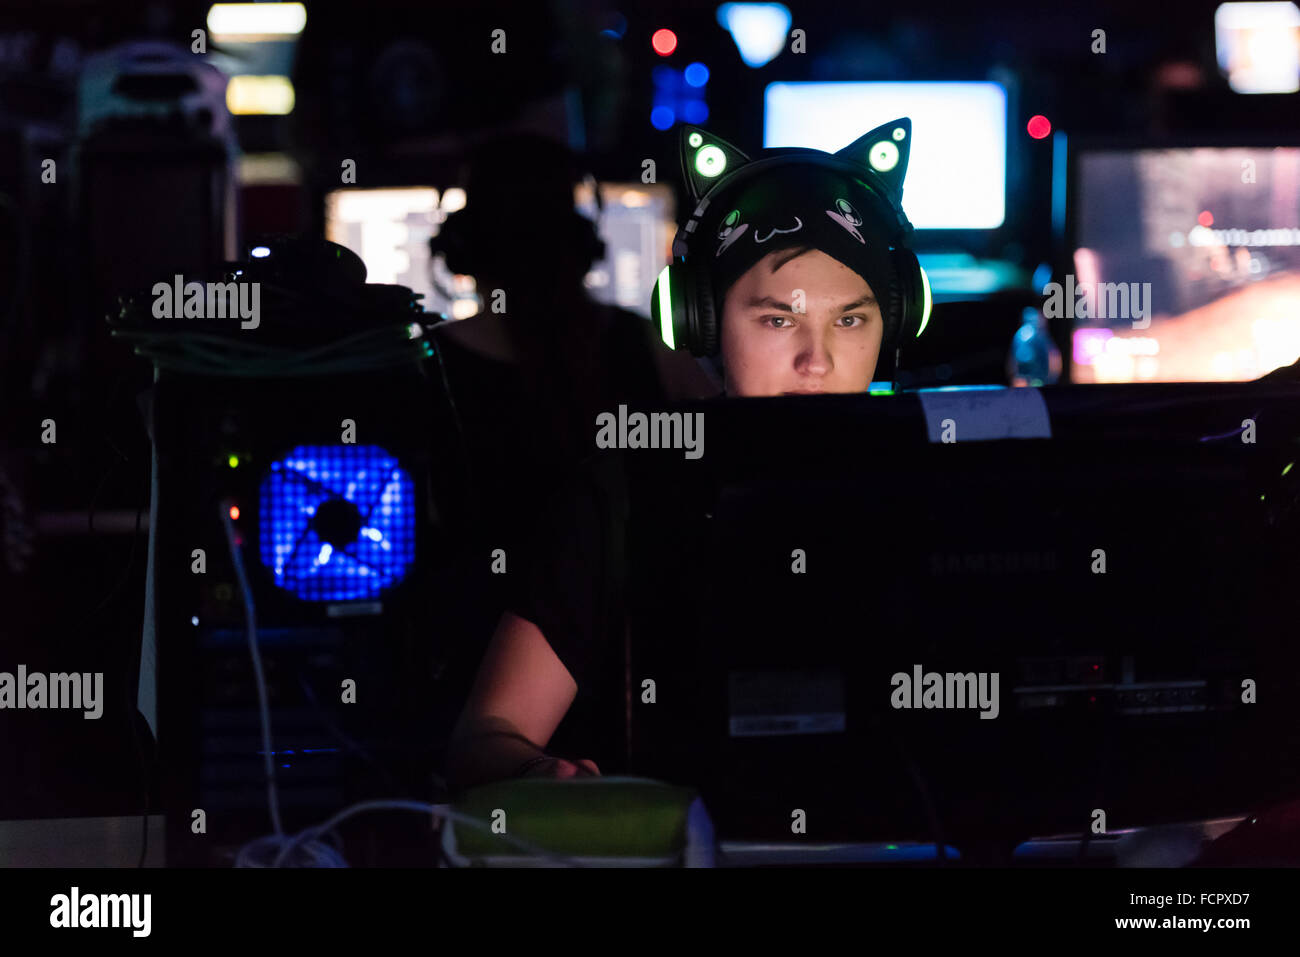 A concentrated computer game player, dimly lit only by his computer screen at NetGame 2015, Switzerland's largest LAN party. Stock Photo